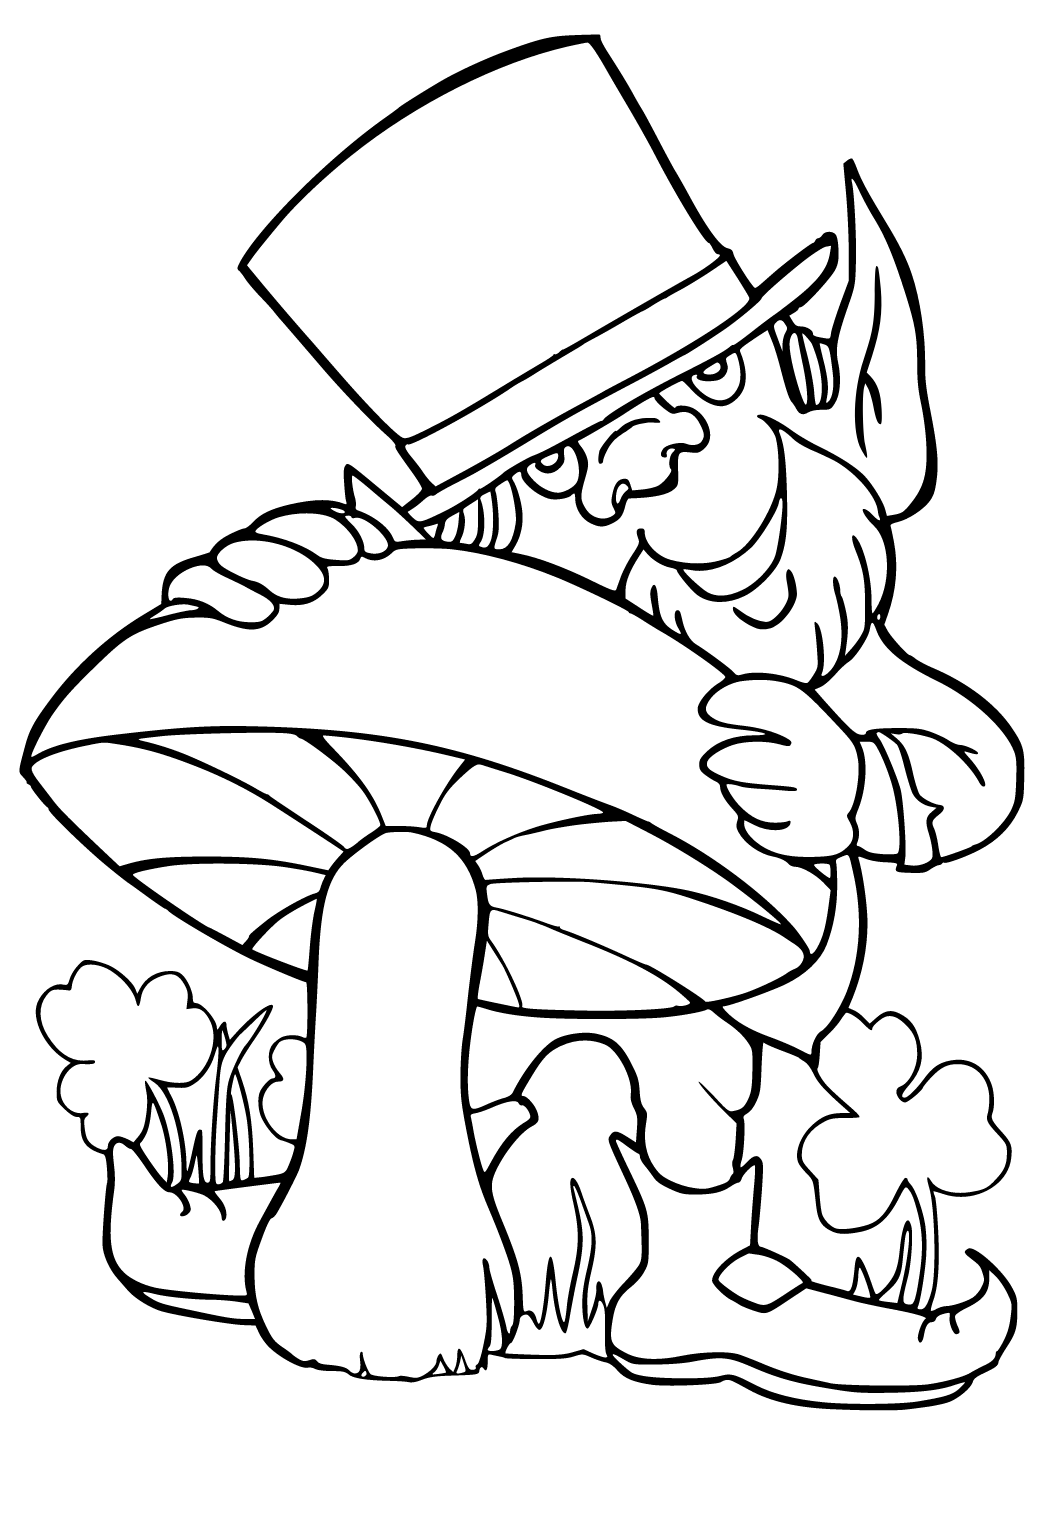 Free printable st patricks day mushroom coloring page for adults and kids